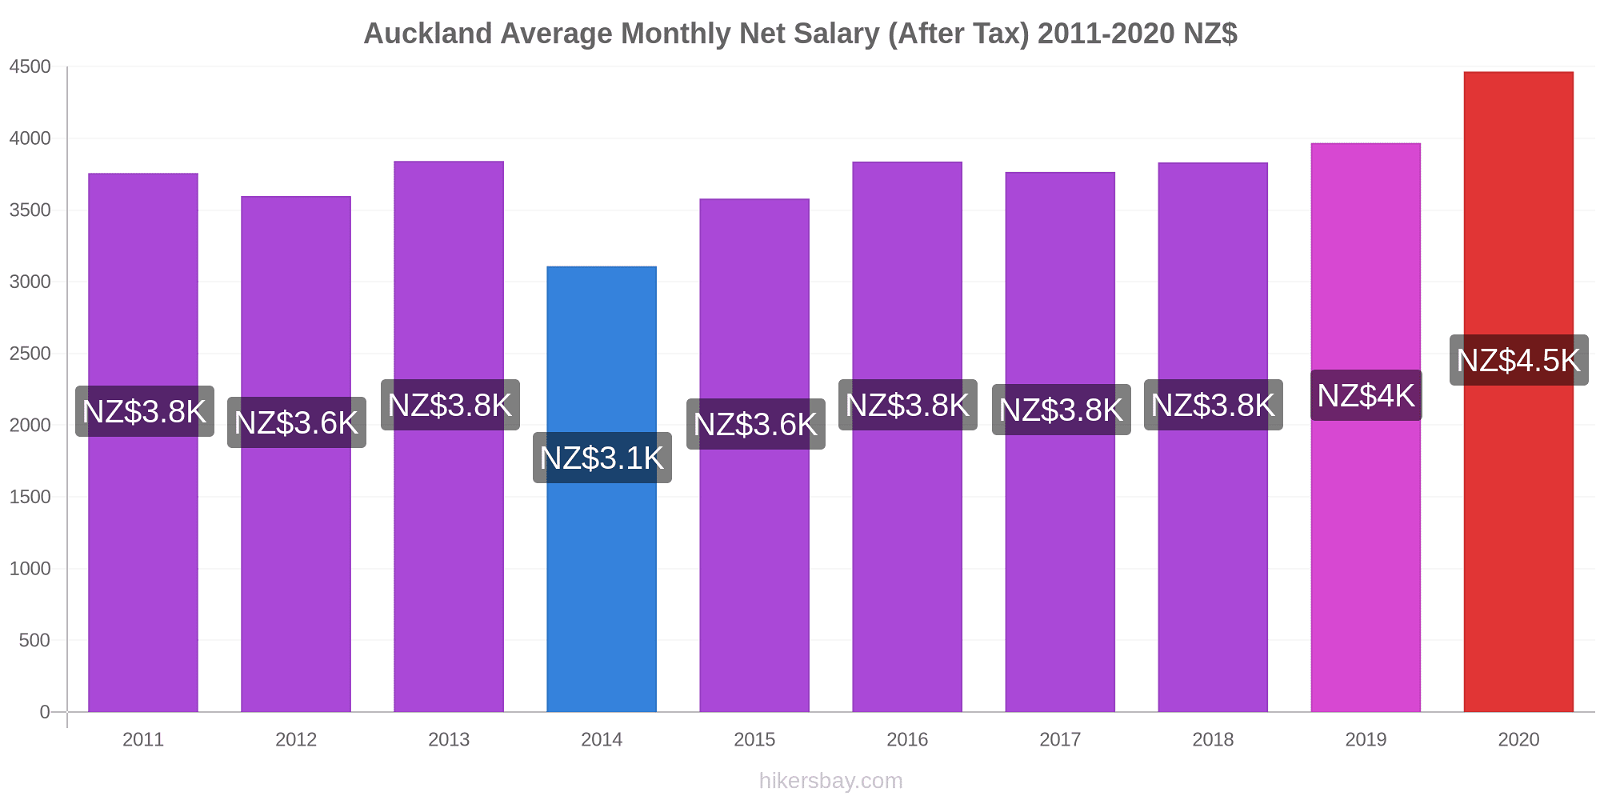 Auckland price changes Average Monthly Net Salary (After Tax) hikersbay.com